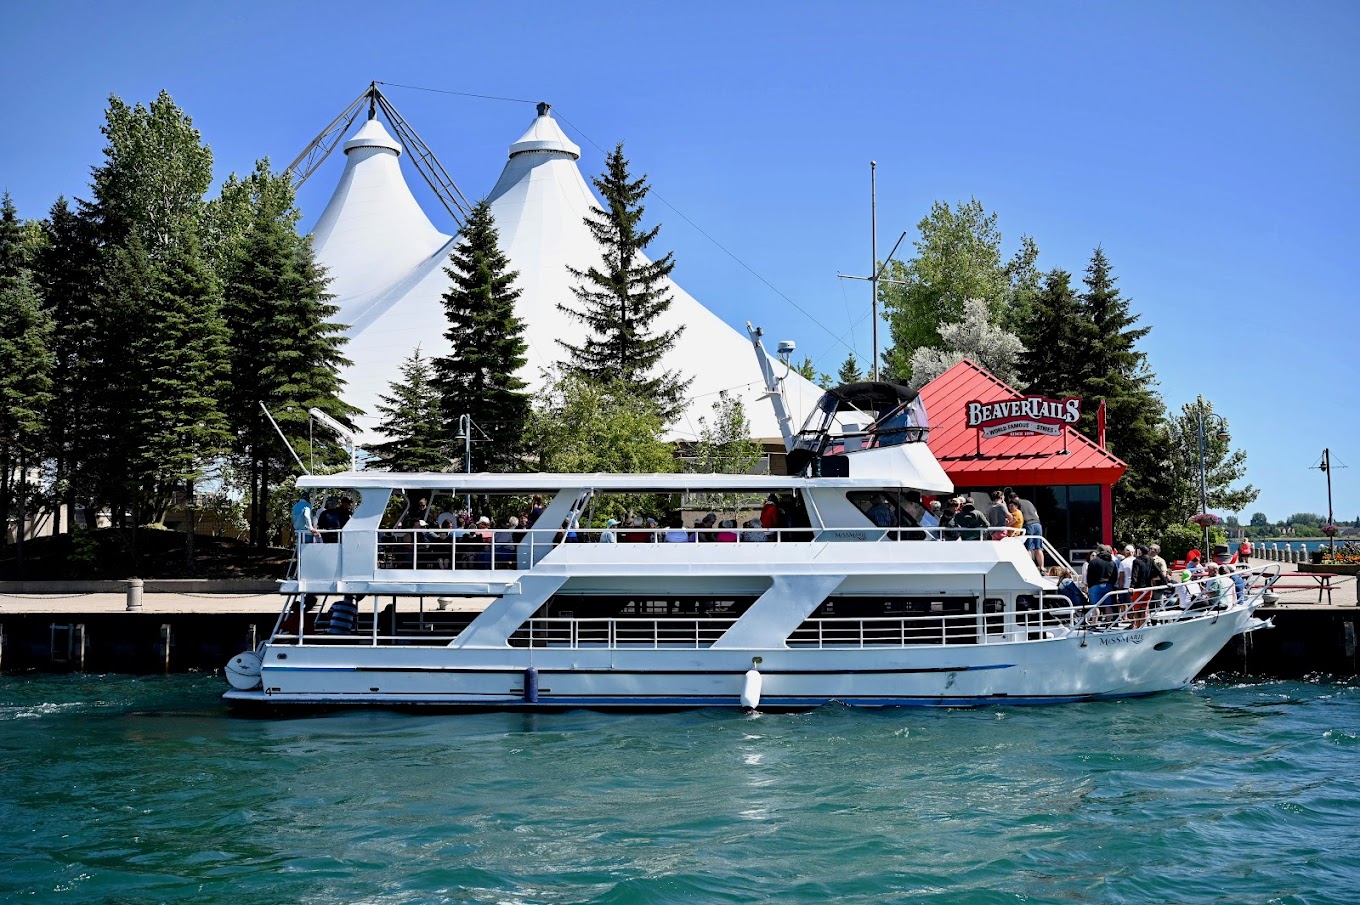 the ship "Miss Marie" docked near Roberta Bondar Park; a large white boat docked on green-blue lake water next to two tall-peaked tent pavilions that peek up above the trees. The sky is a clear, sunny blue. 